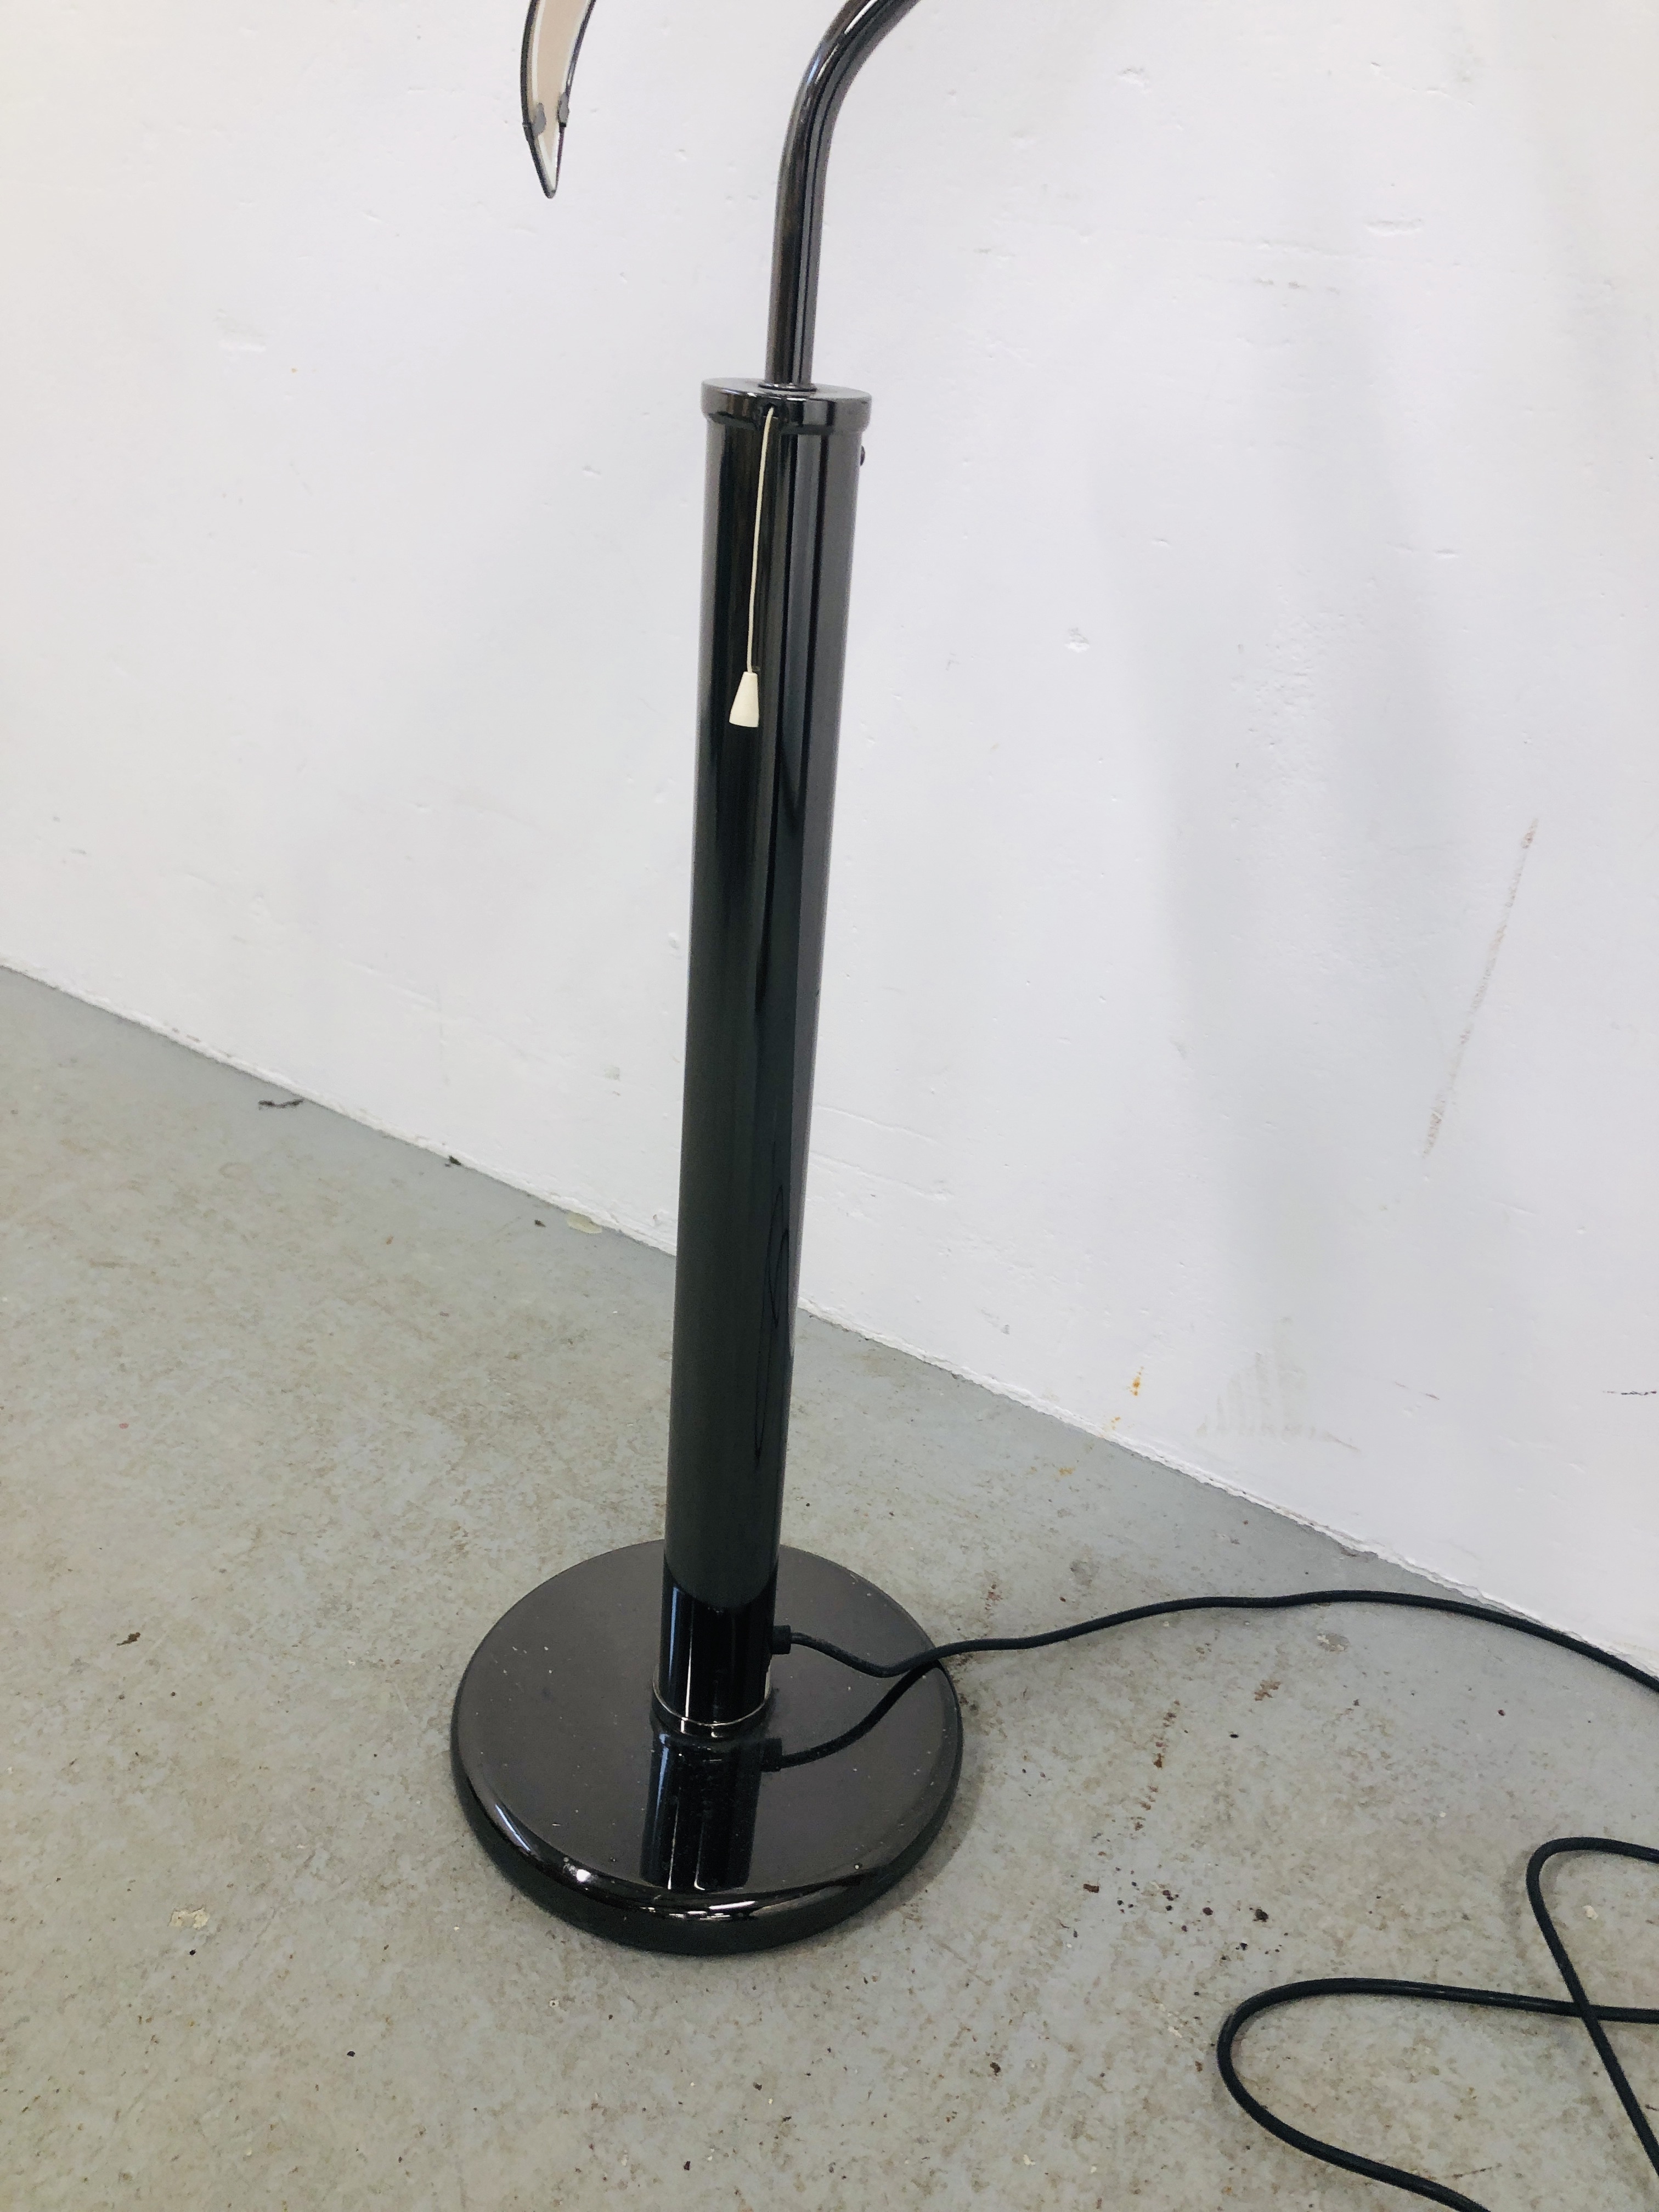 A RETRO STYLE FLOOR STANDING FLOWER HEAD DESIGN LAMP STANDARD OVERALL HEIGHT 193CM. - Image 5 of 5